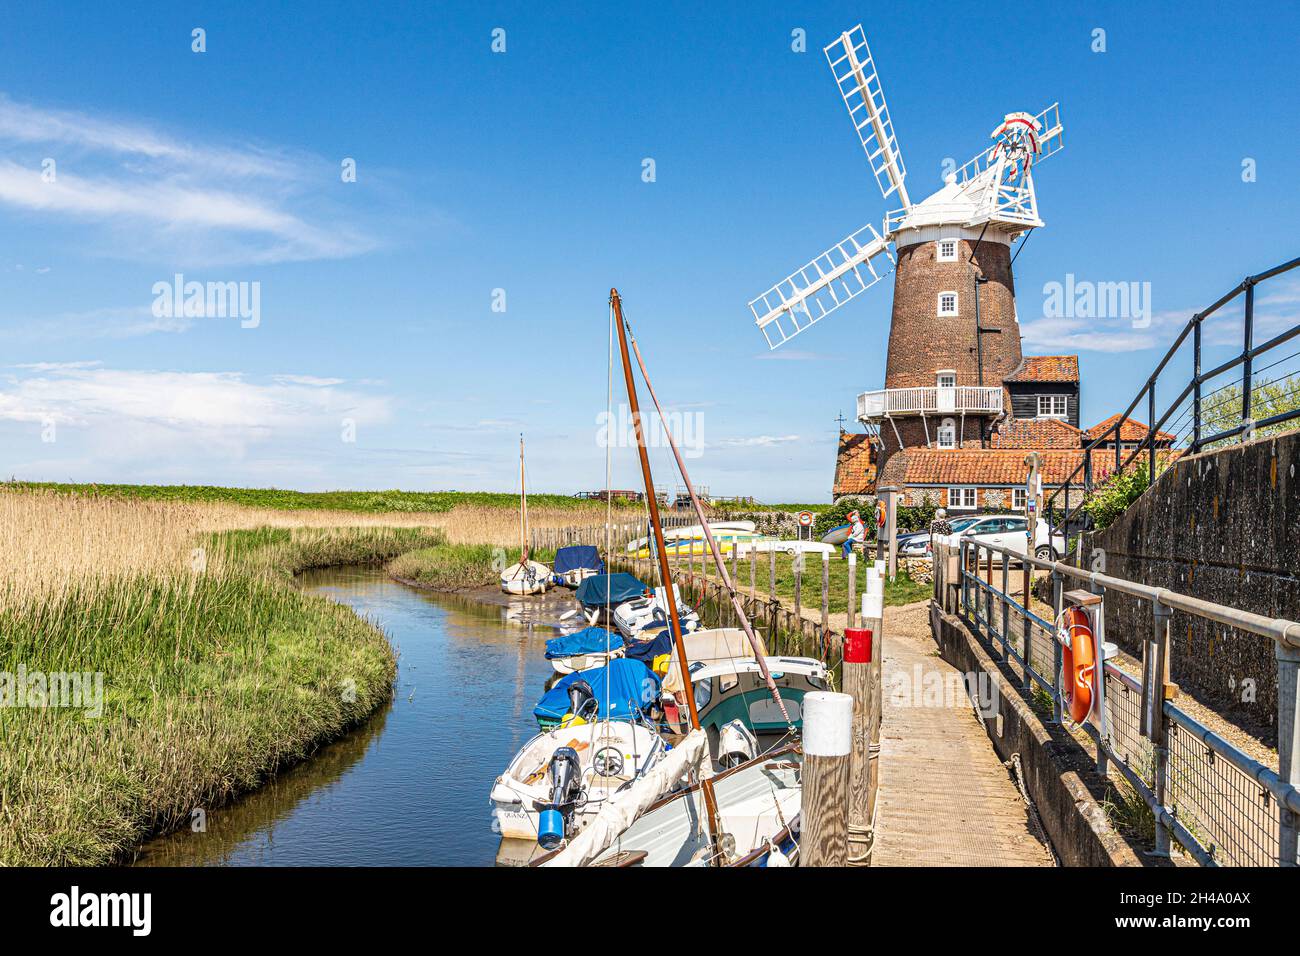 The early 19th century Cley Windmill beside the River Glaven in the village of Cley next the Sea, Norfolk UK Stock Photo